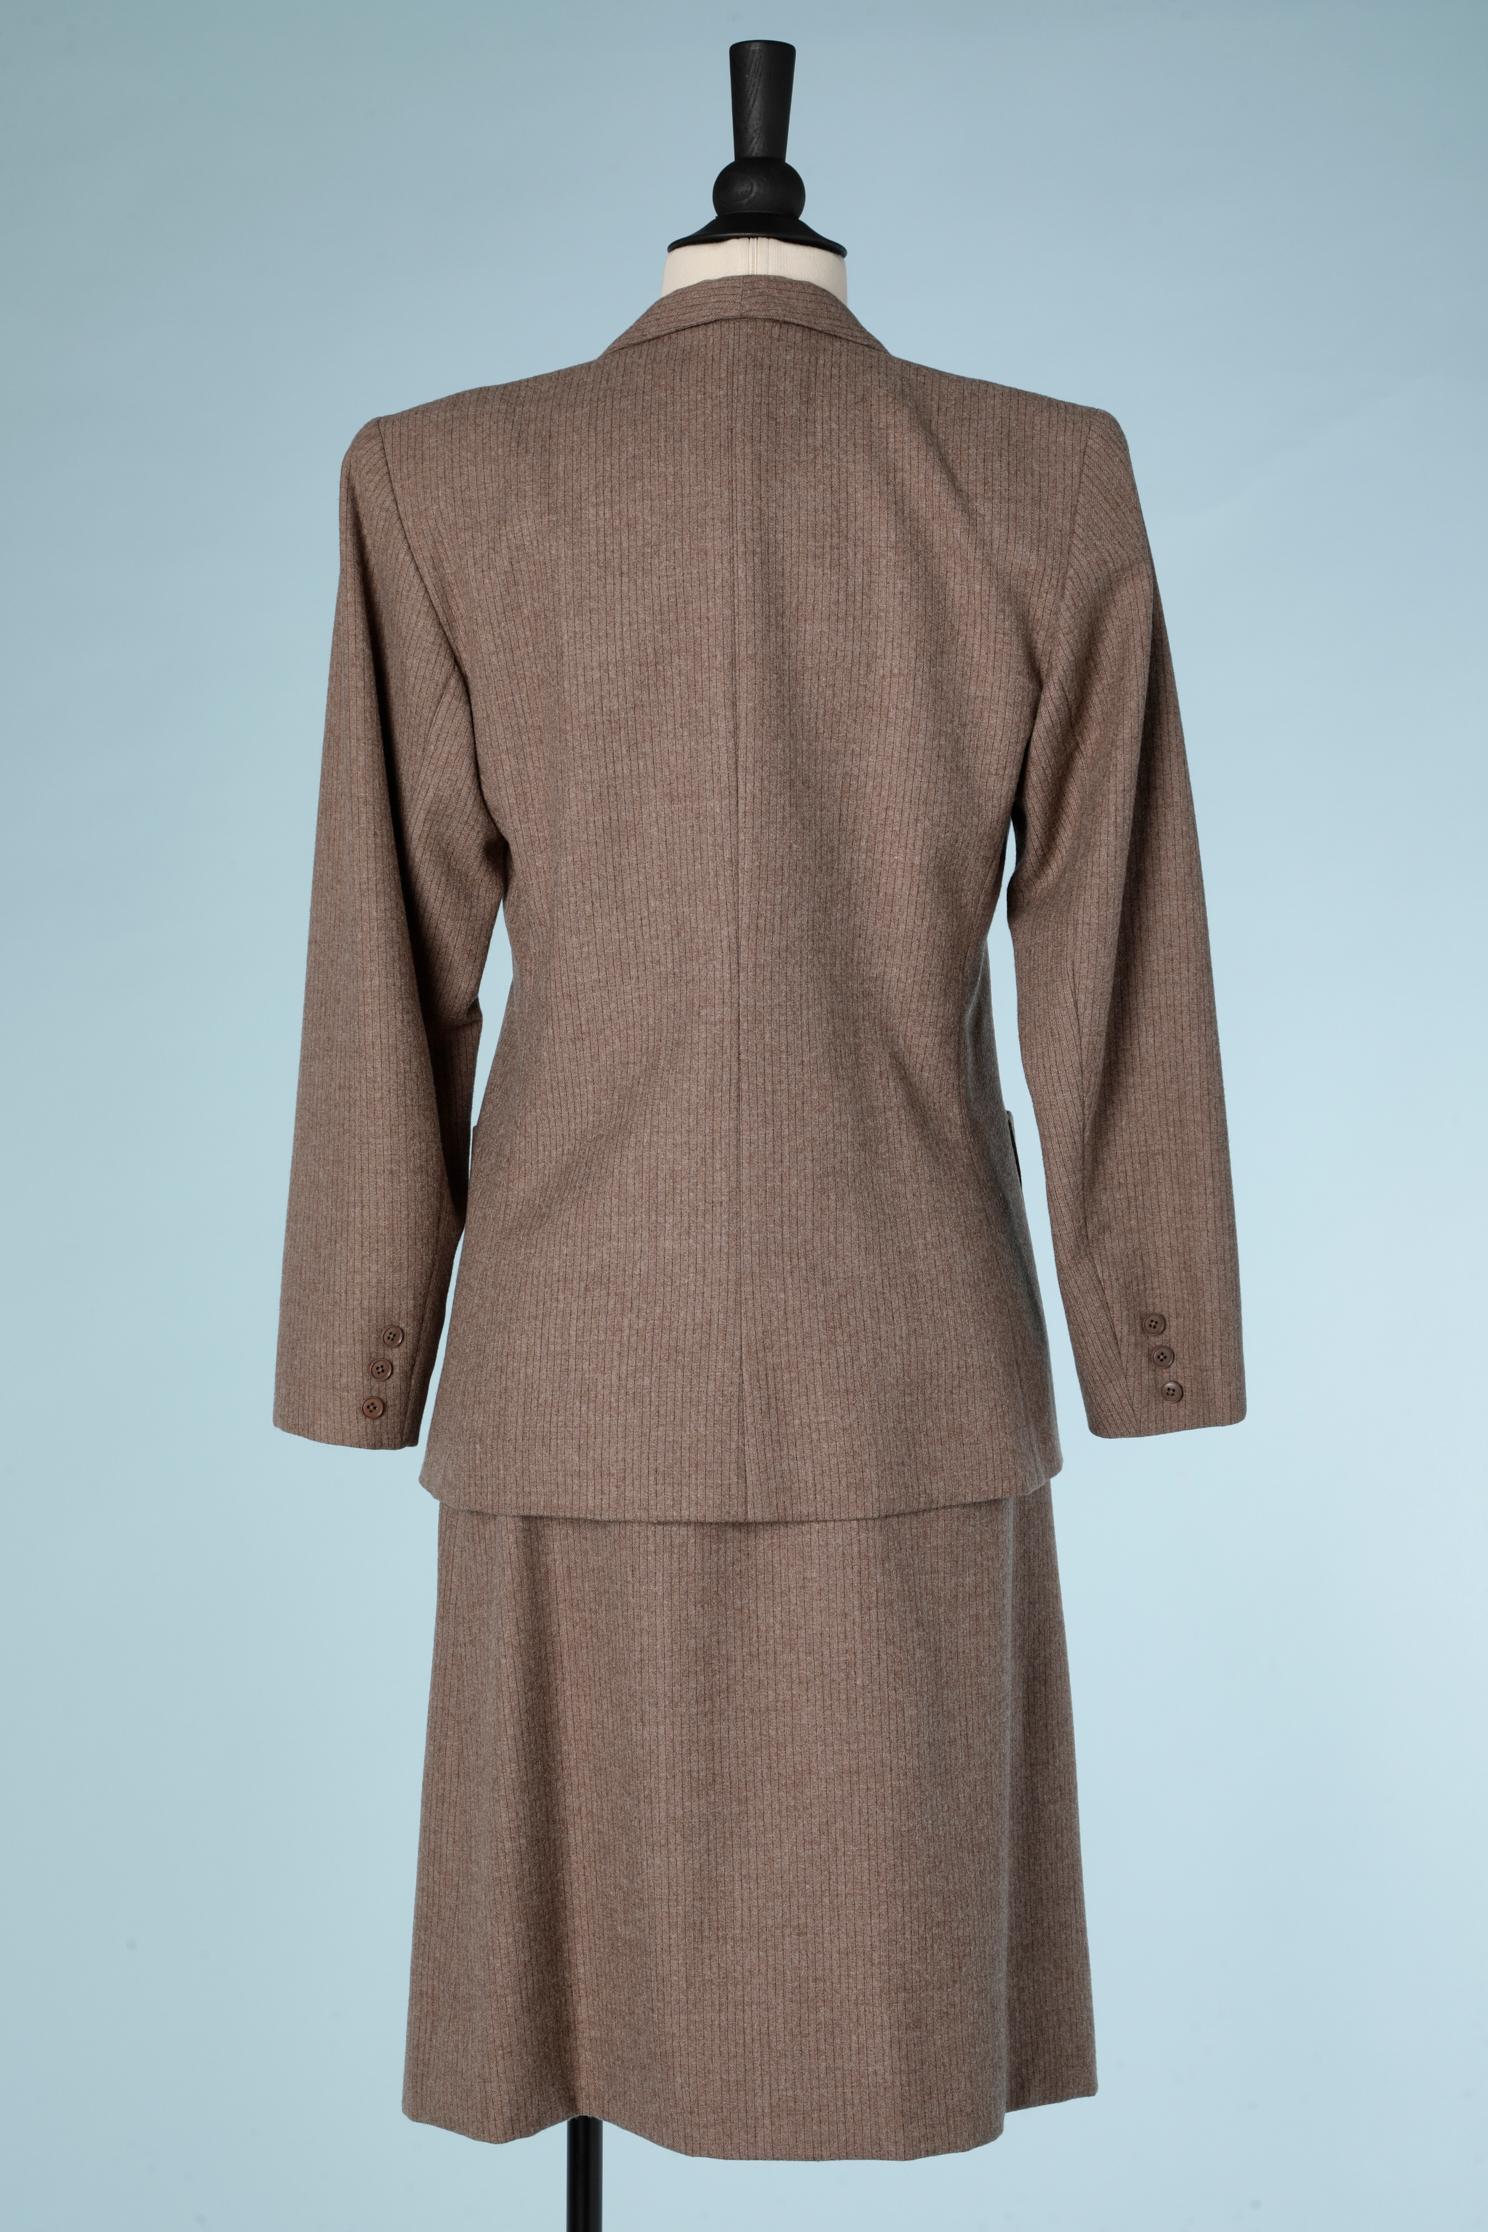 Light brown wool skirt suit with thin stripes Hanae Mori  For Sale 1